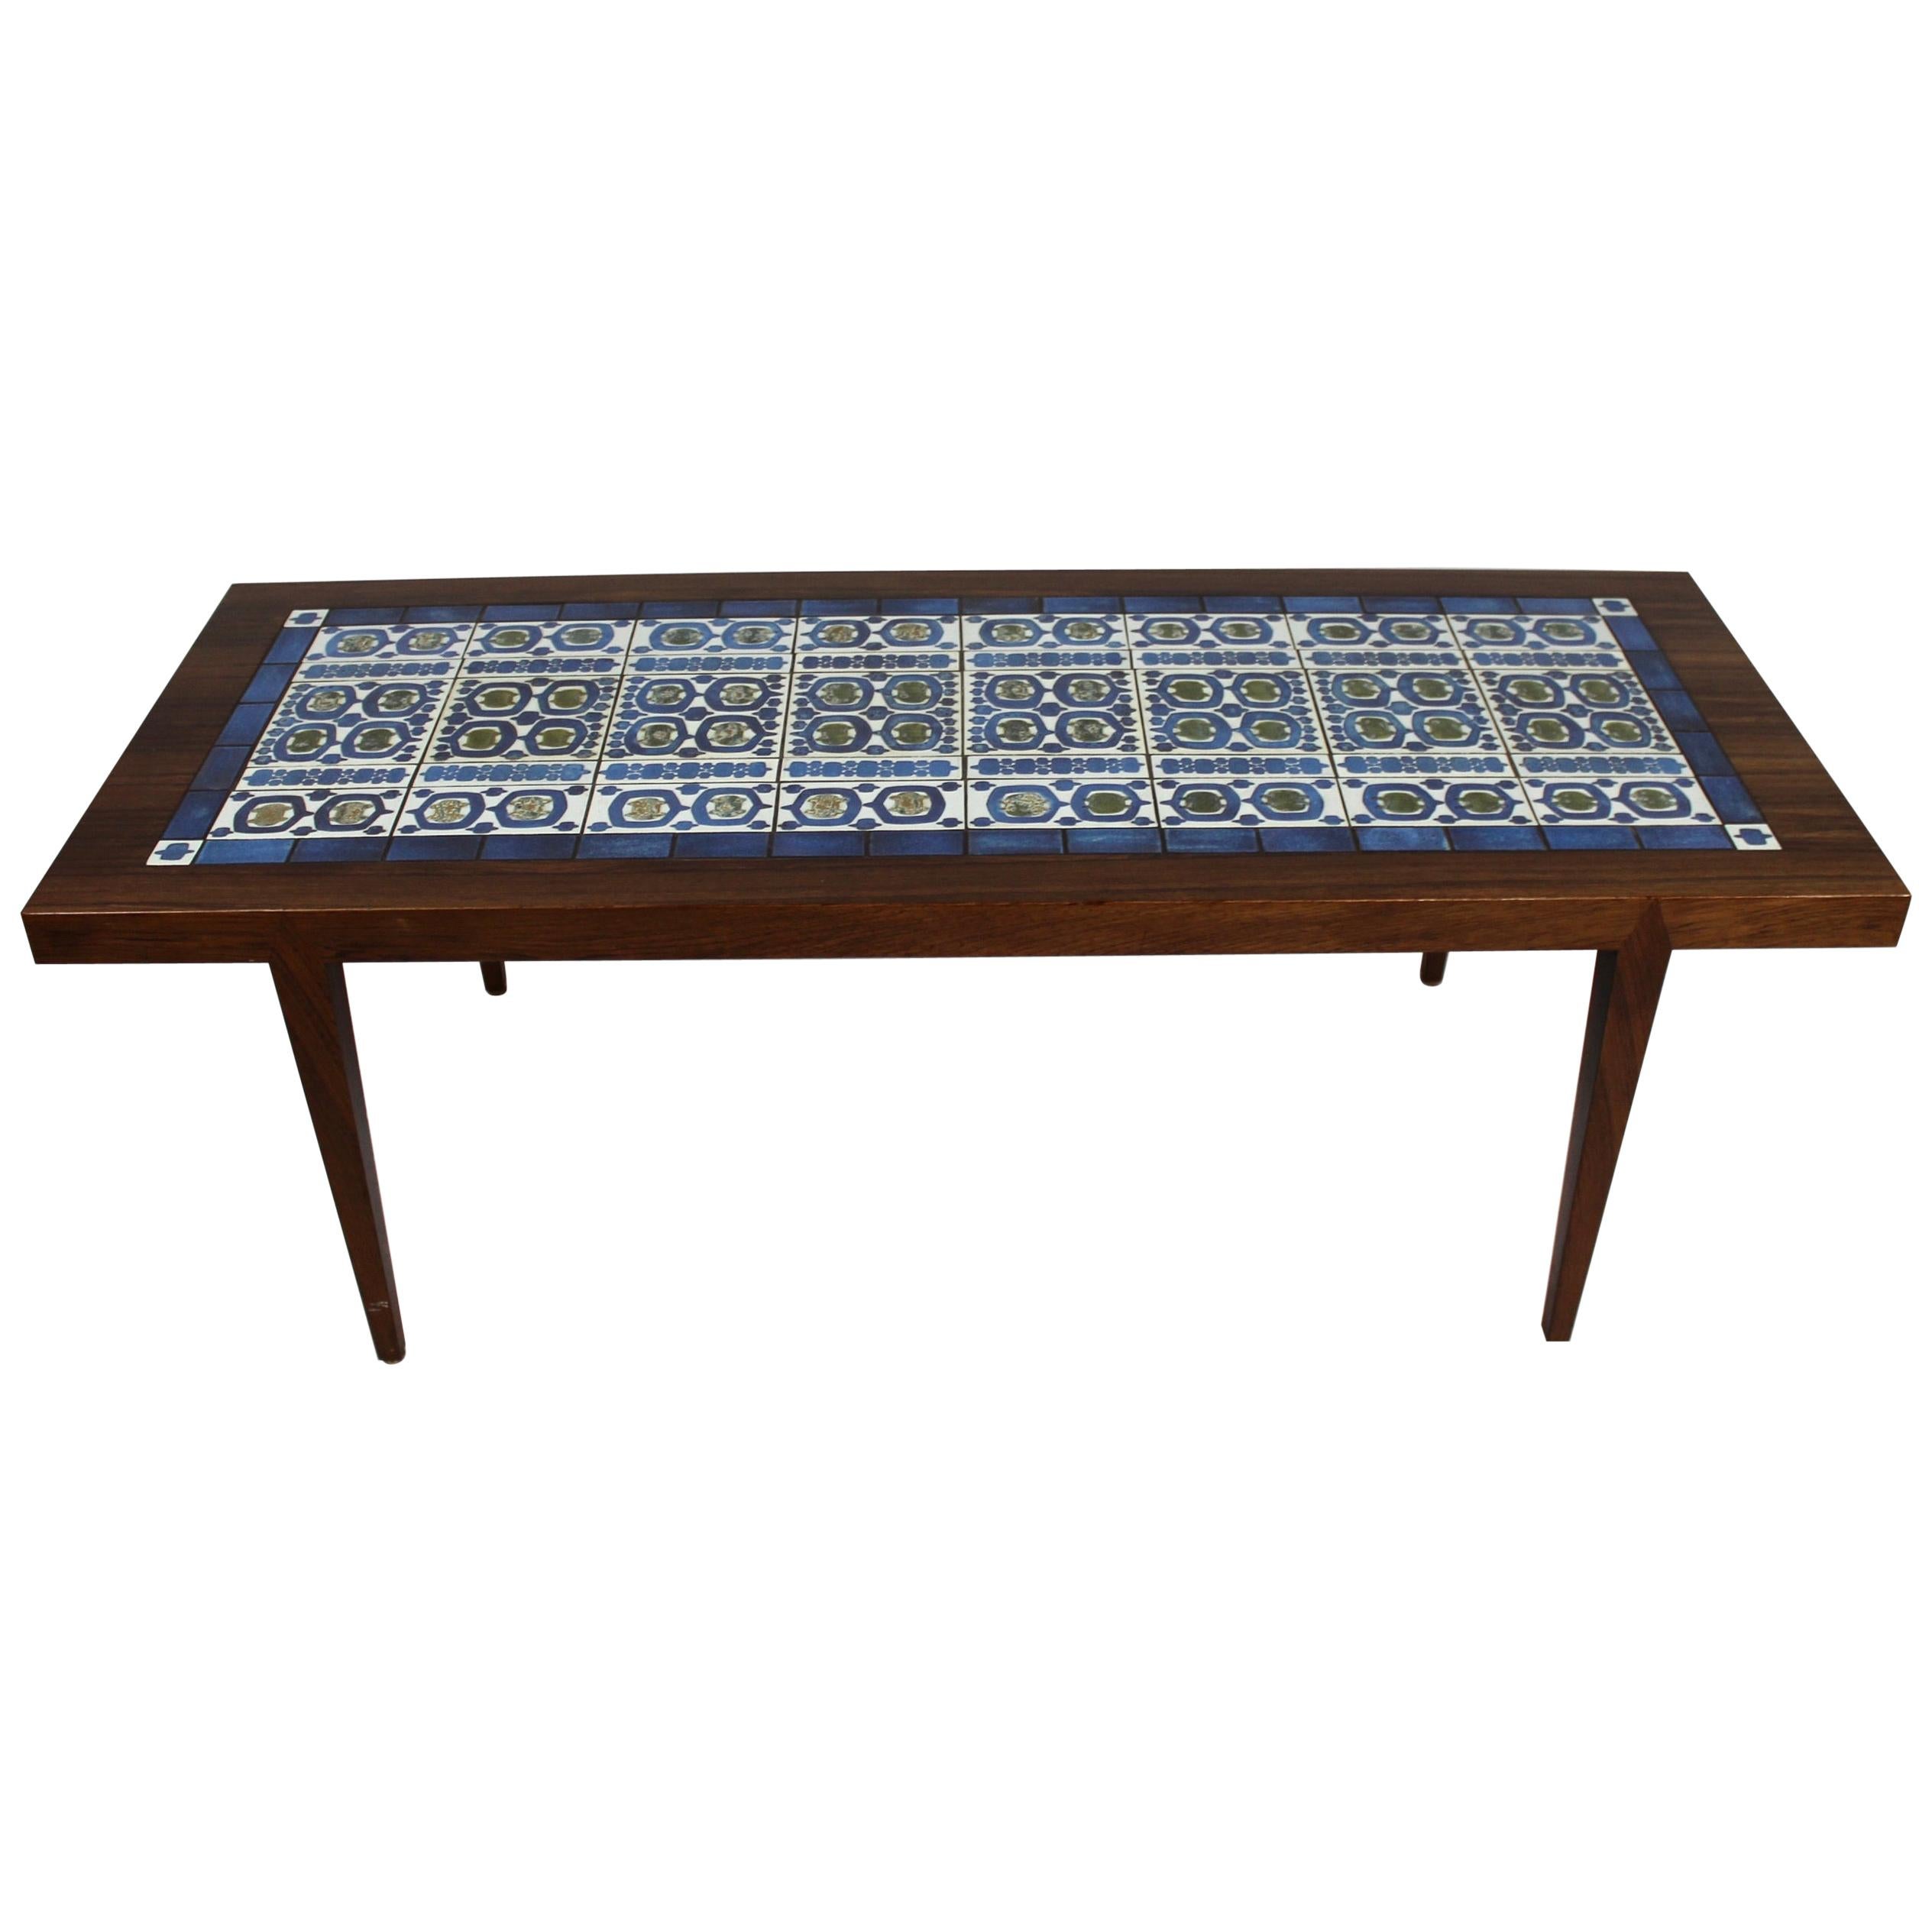 Coffee Table of Rosewood and Dark Blue Tiles, by Severin Hansen for Haslev